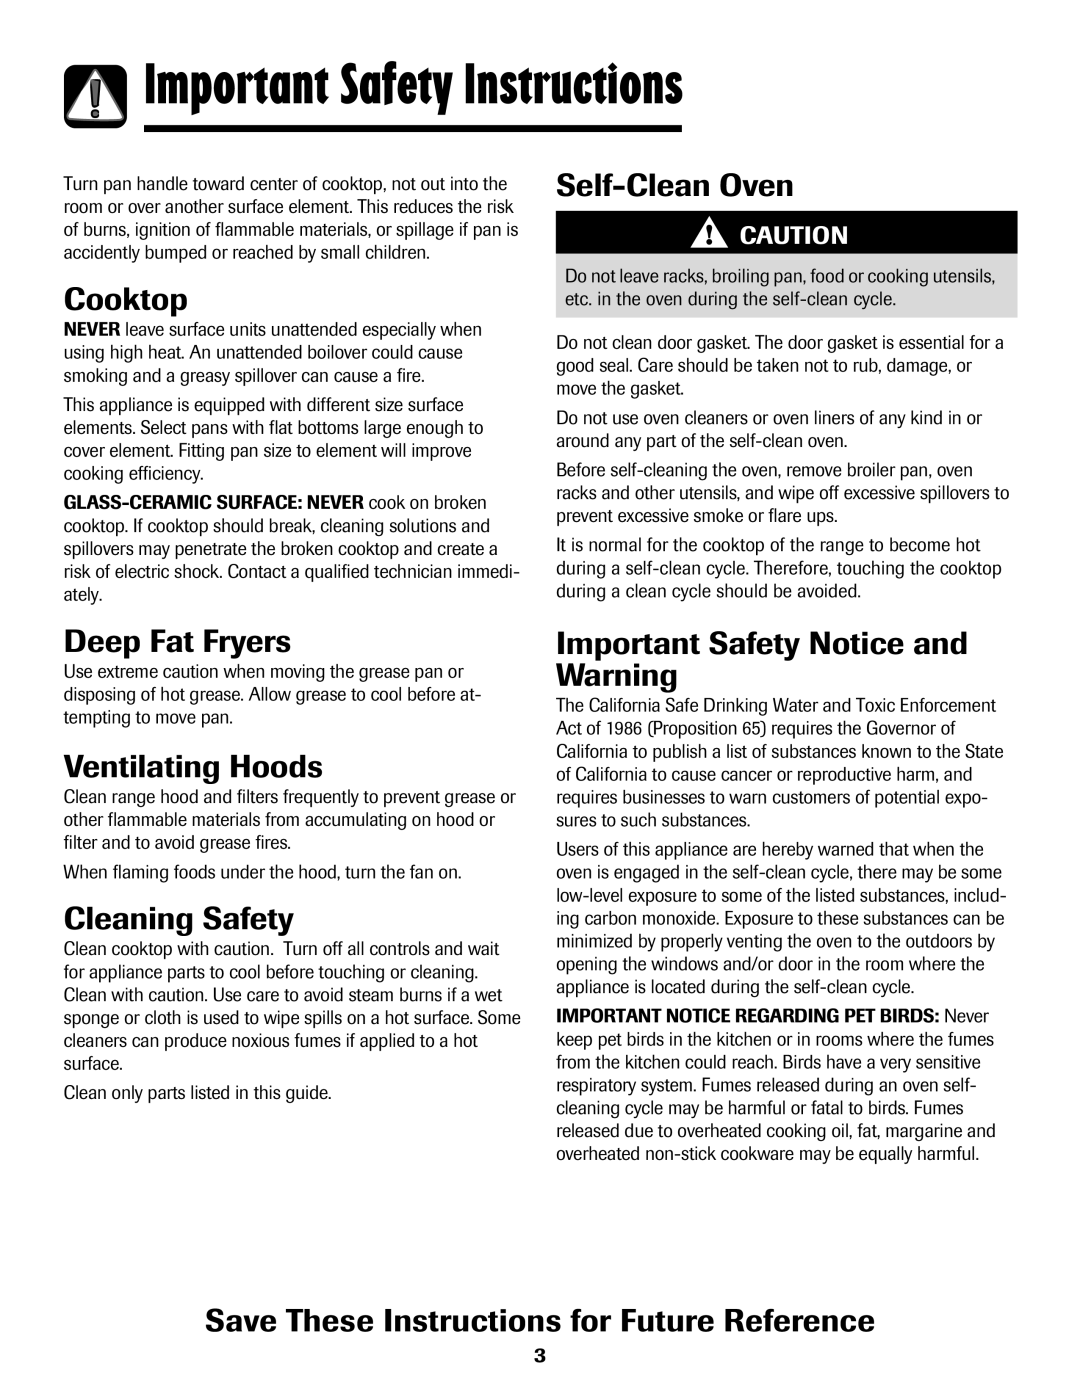 Amana Smoothtop important safety instructions Cooktop, Self-Clean Oven, Deep Fat Fryers, Ventilating Hoods, Cleaning Safety 